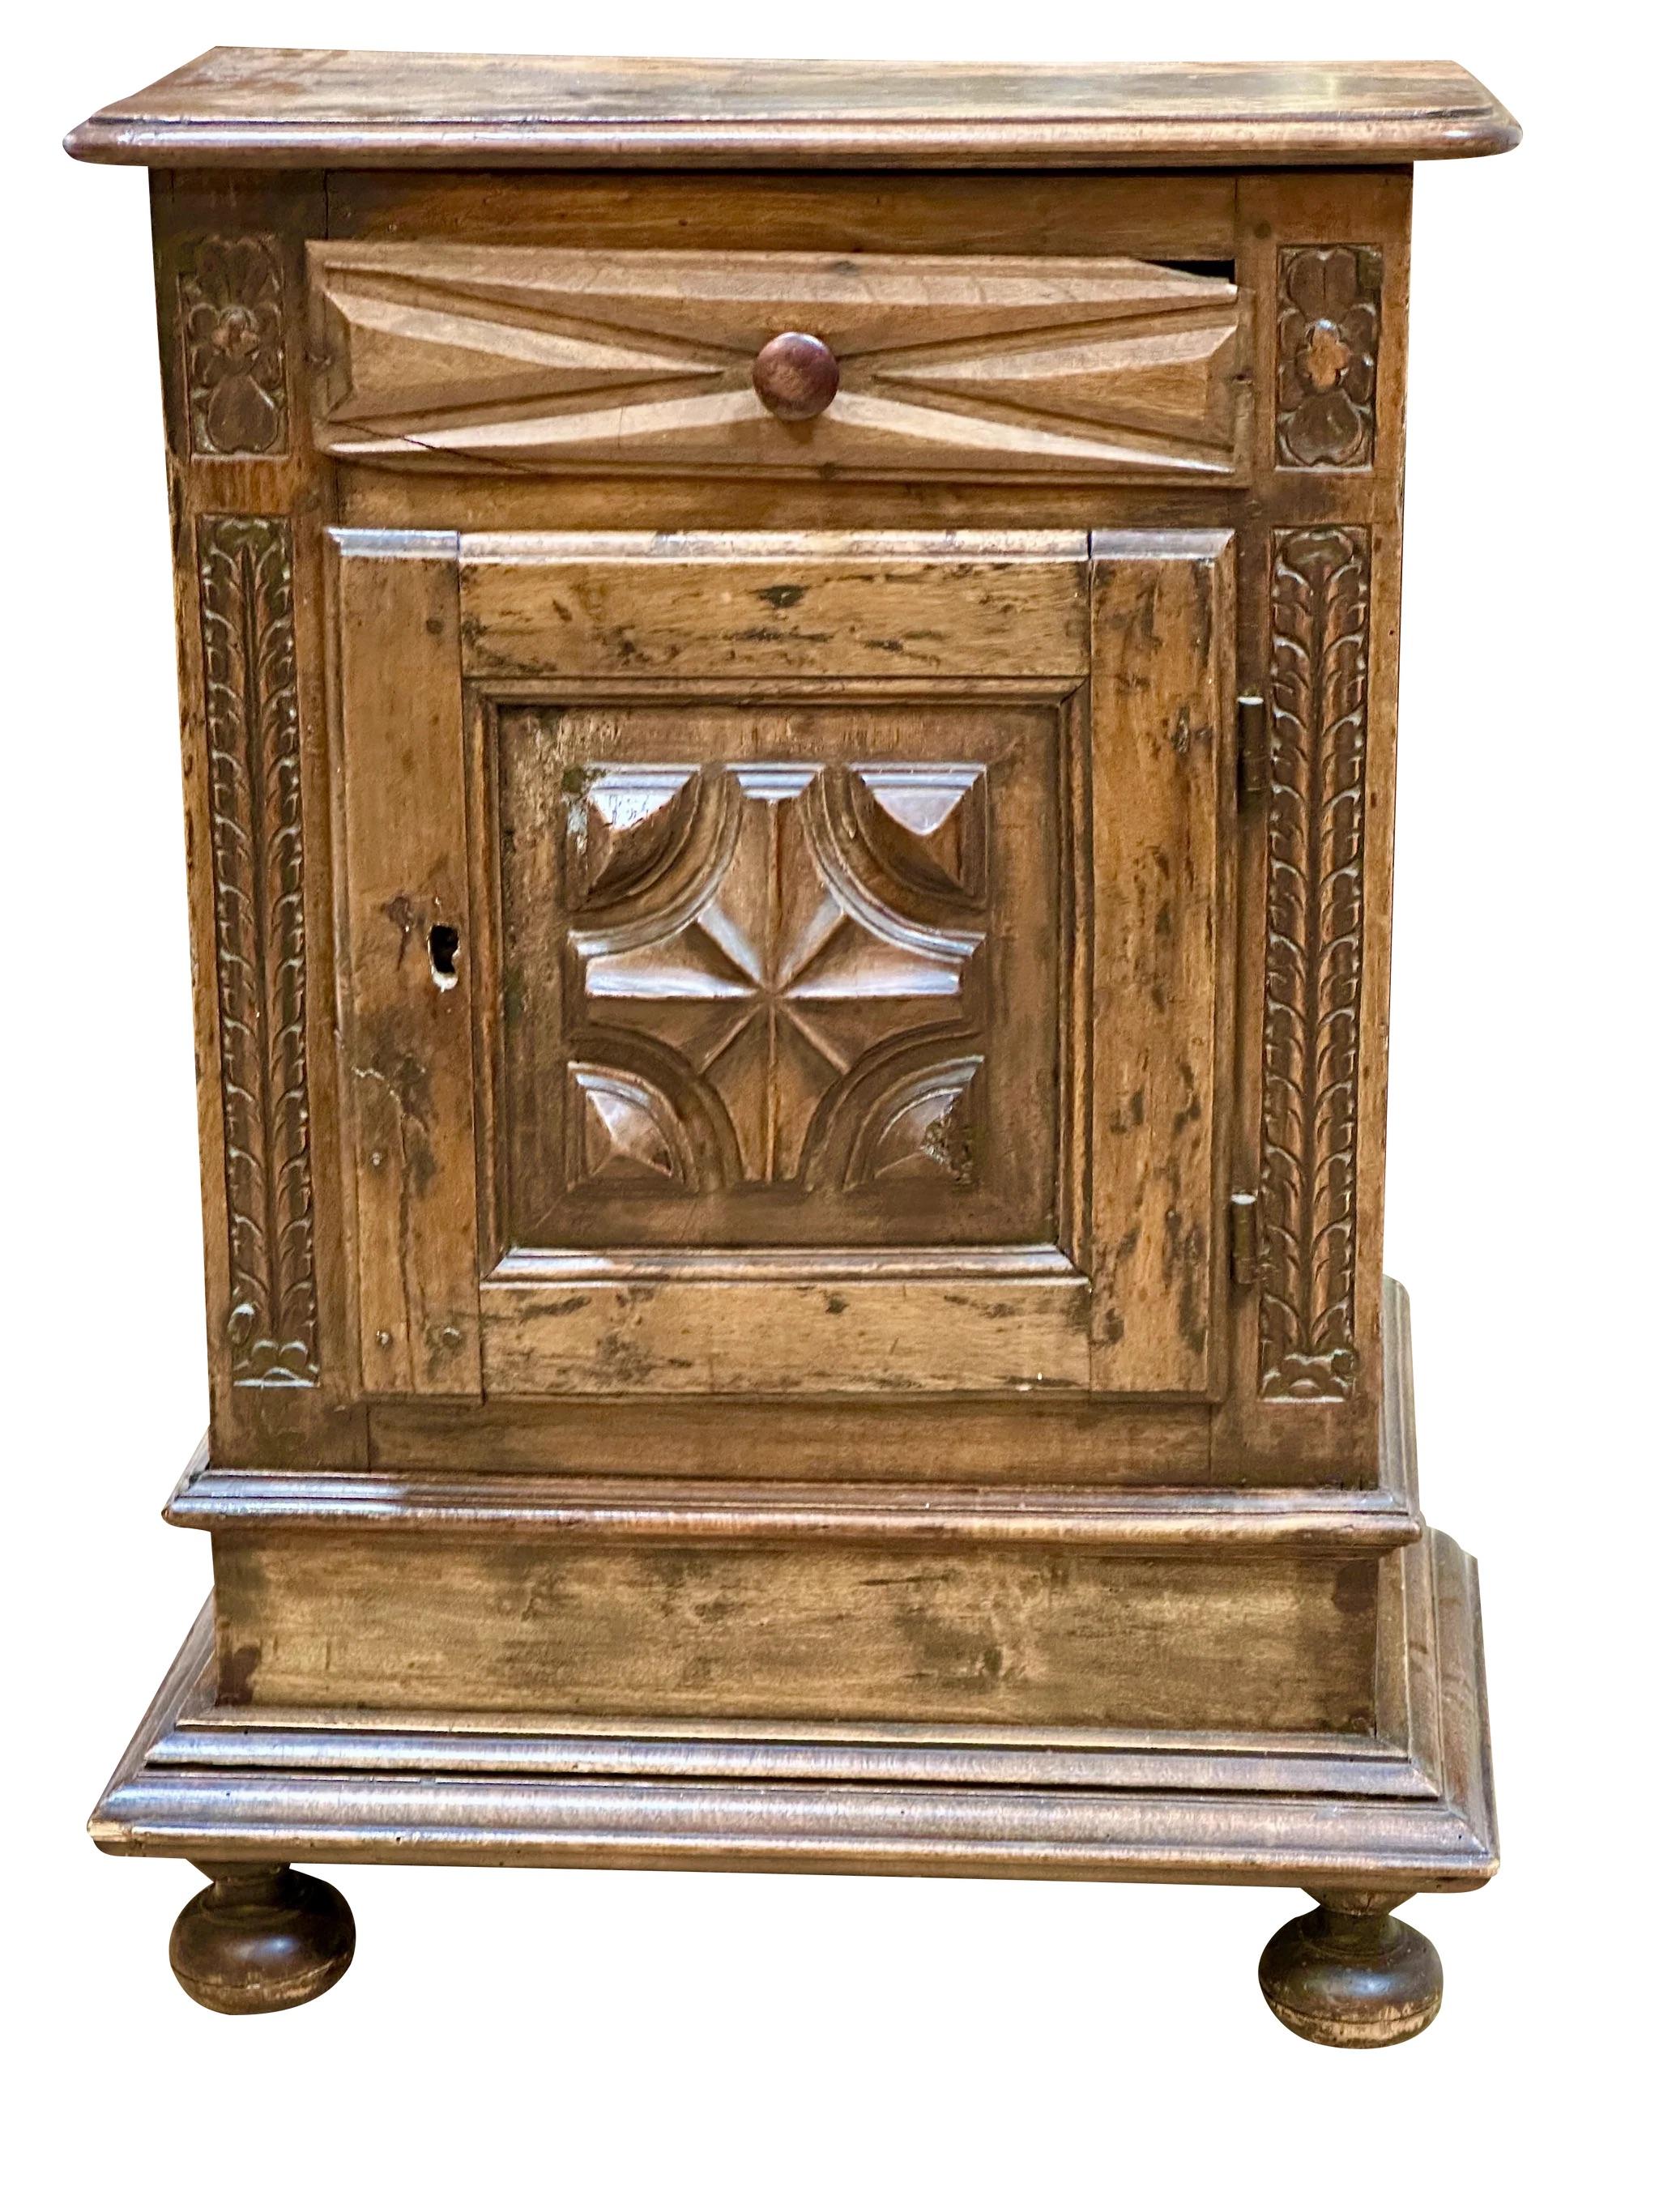 Early Tuscan, Italian walnut cabinet, largely 18th Century with restorations, having a drawer over a deeply carved hinged door over ball feet; 26 inches wide; 14 inches deep; 37 inches high
